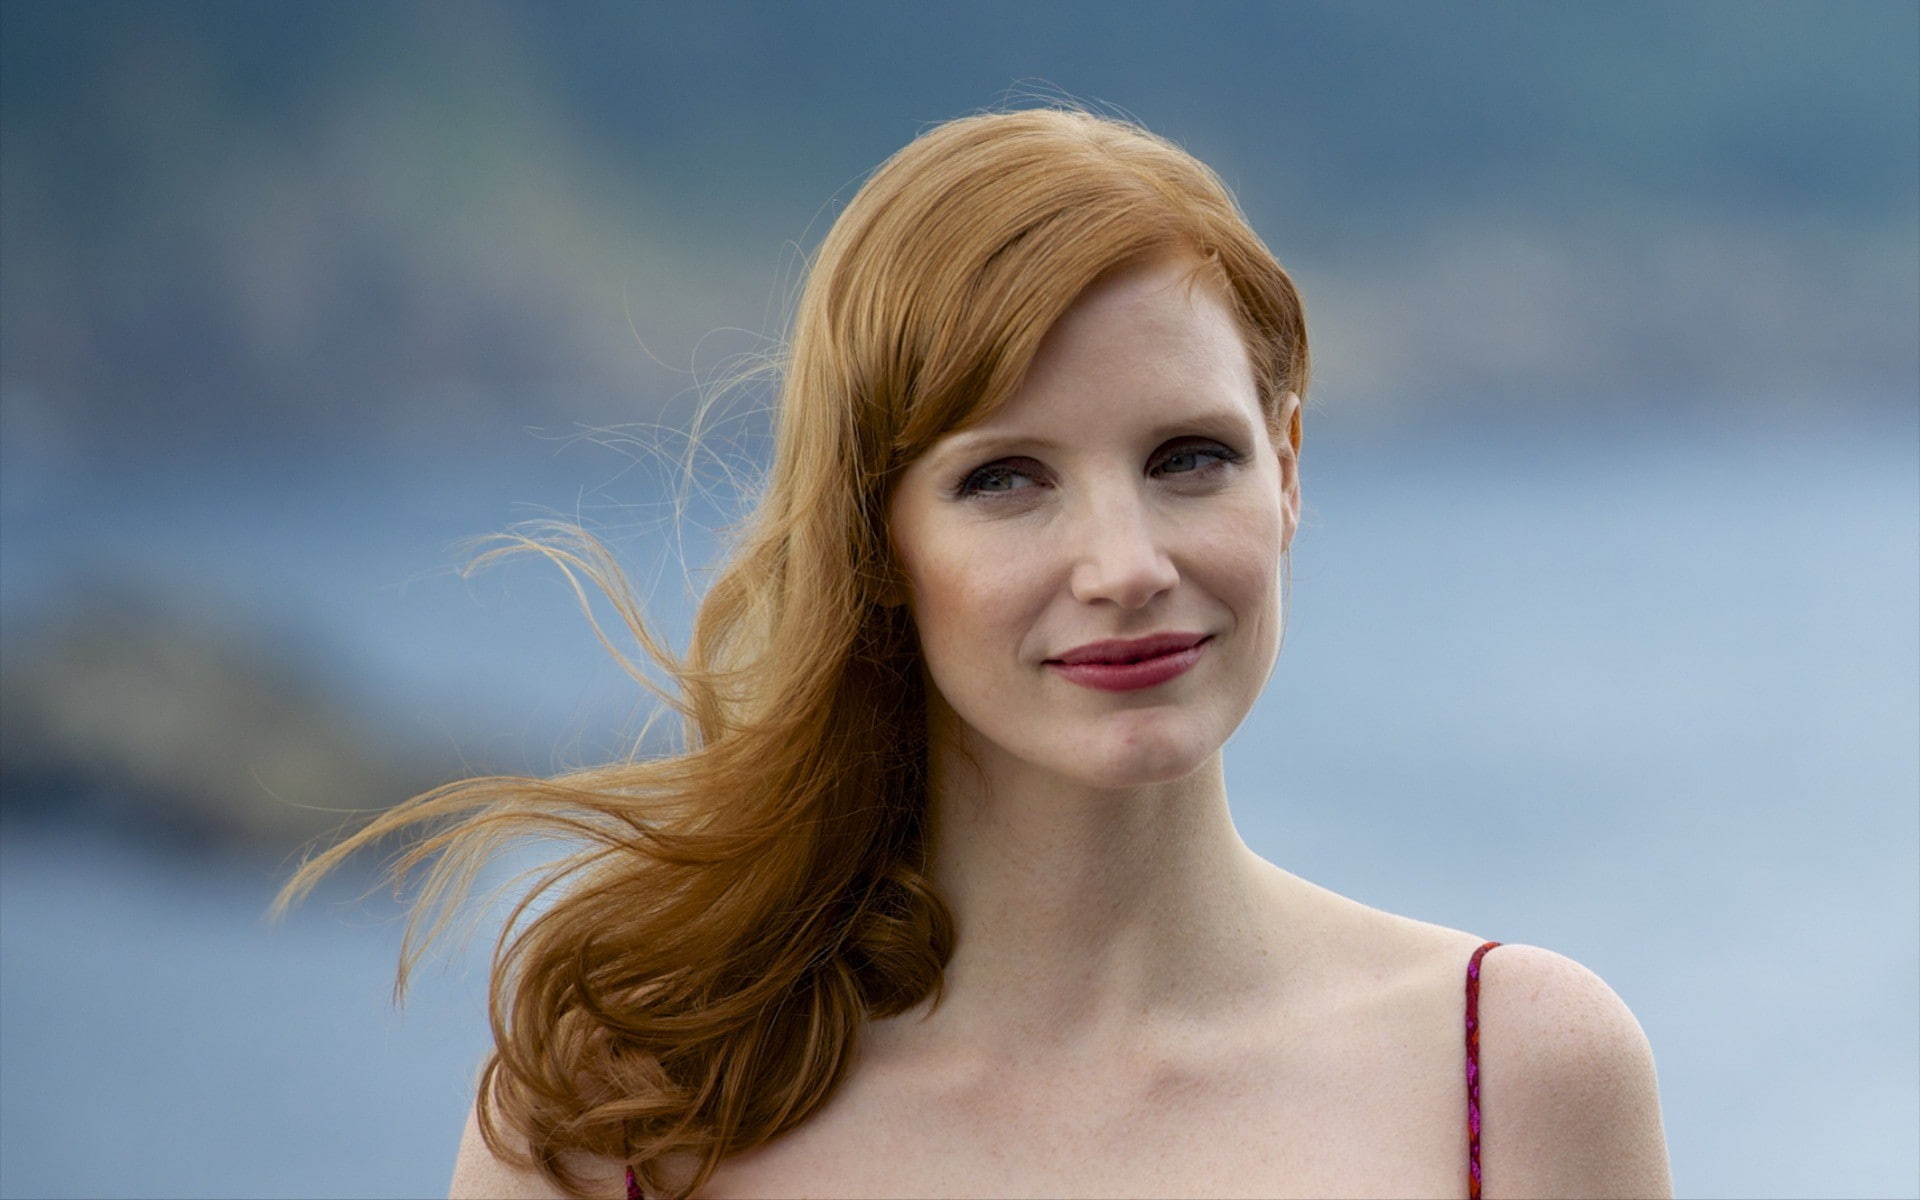 Jessica Chastain, women, redhead, actress, face, celebrity